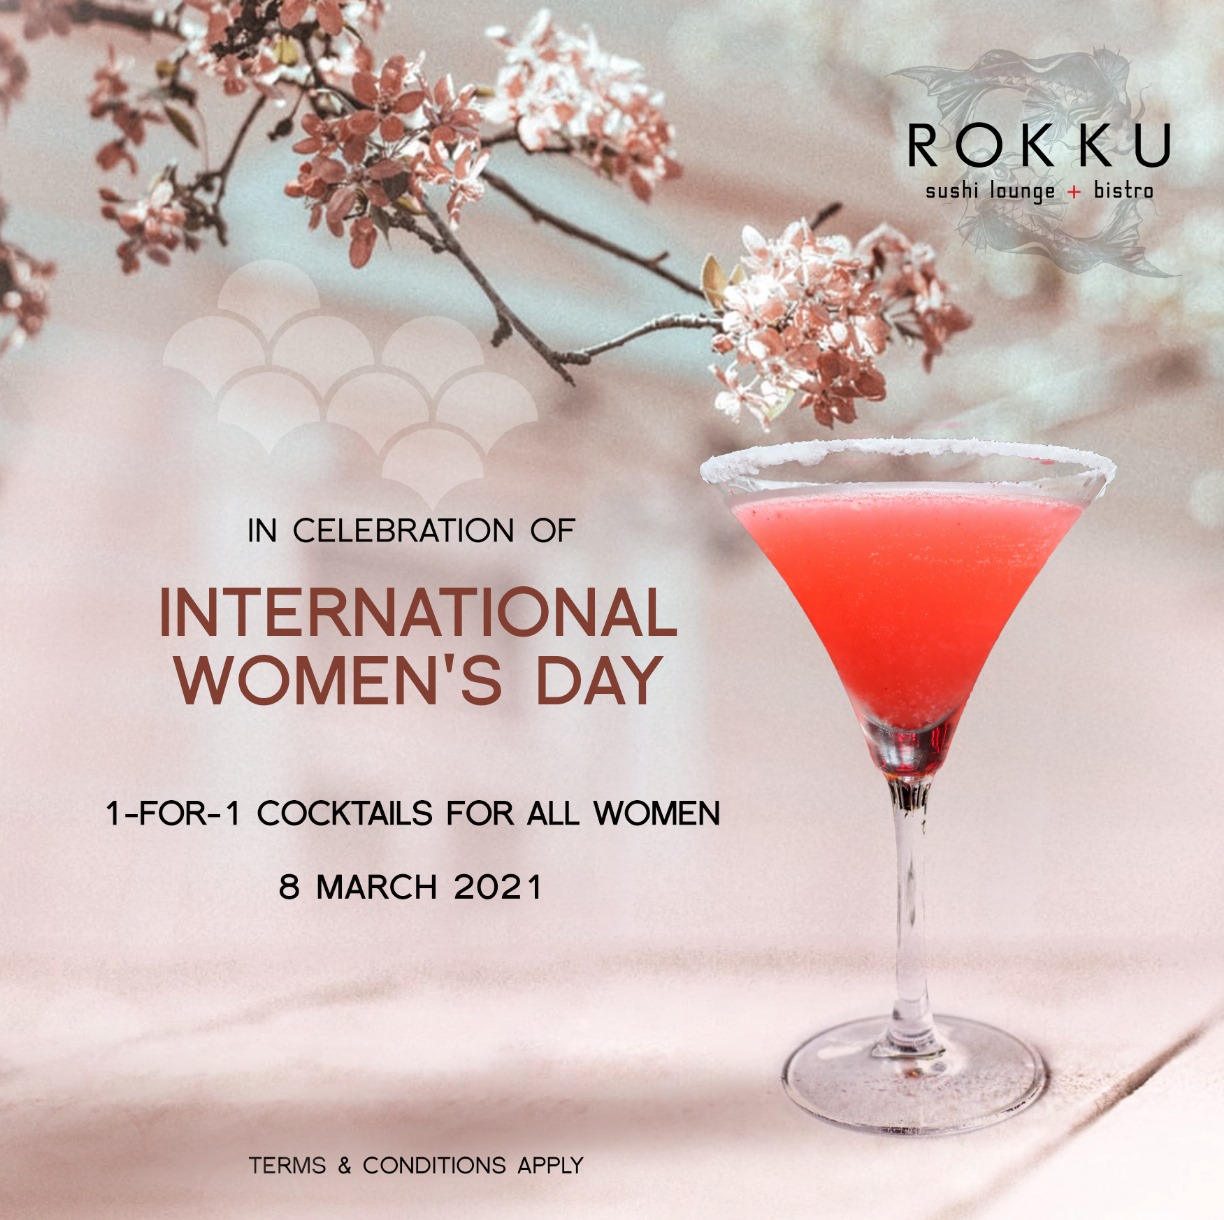 INTERNATIONAL WOMEN’S DAY AT ROKKU ON MARCH 8TH